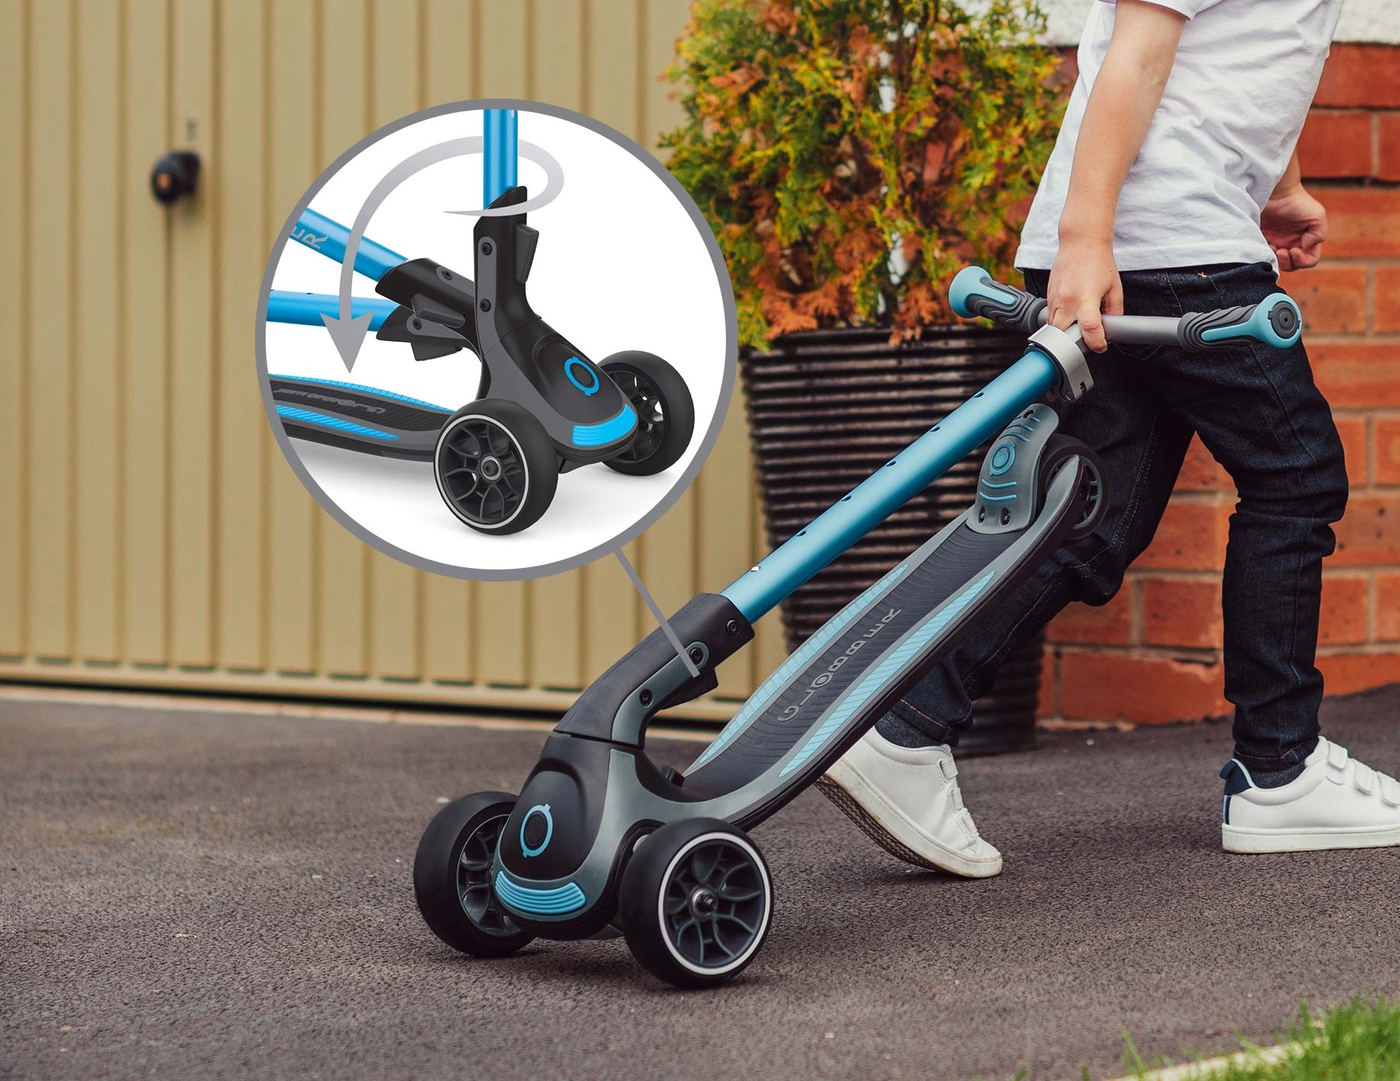 3-wheel foldable scooter for kids and teens